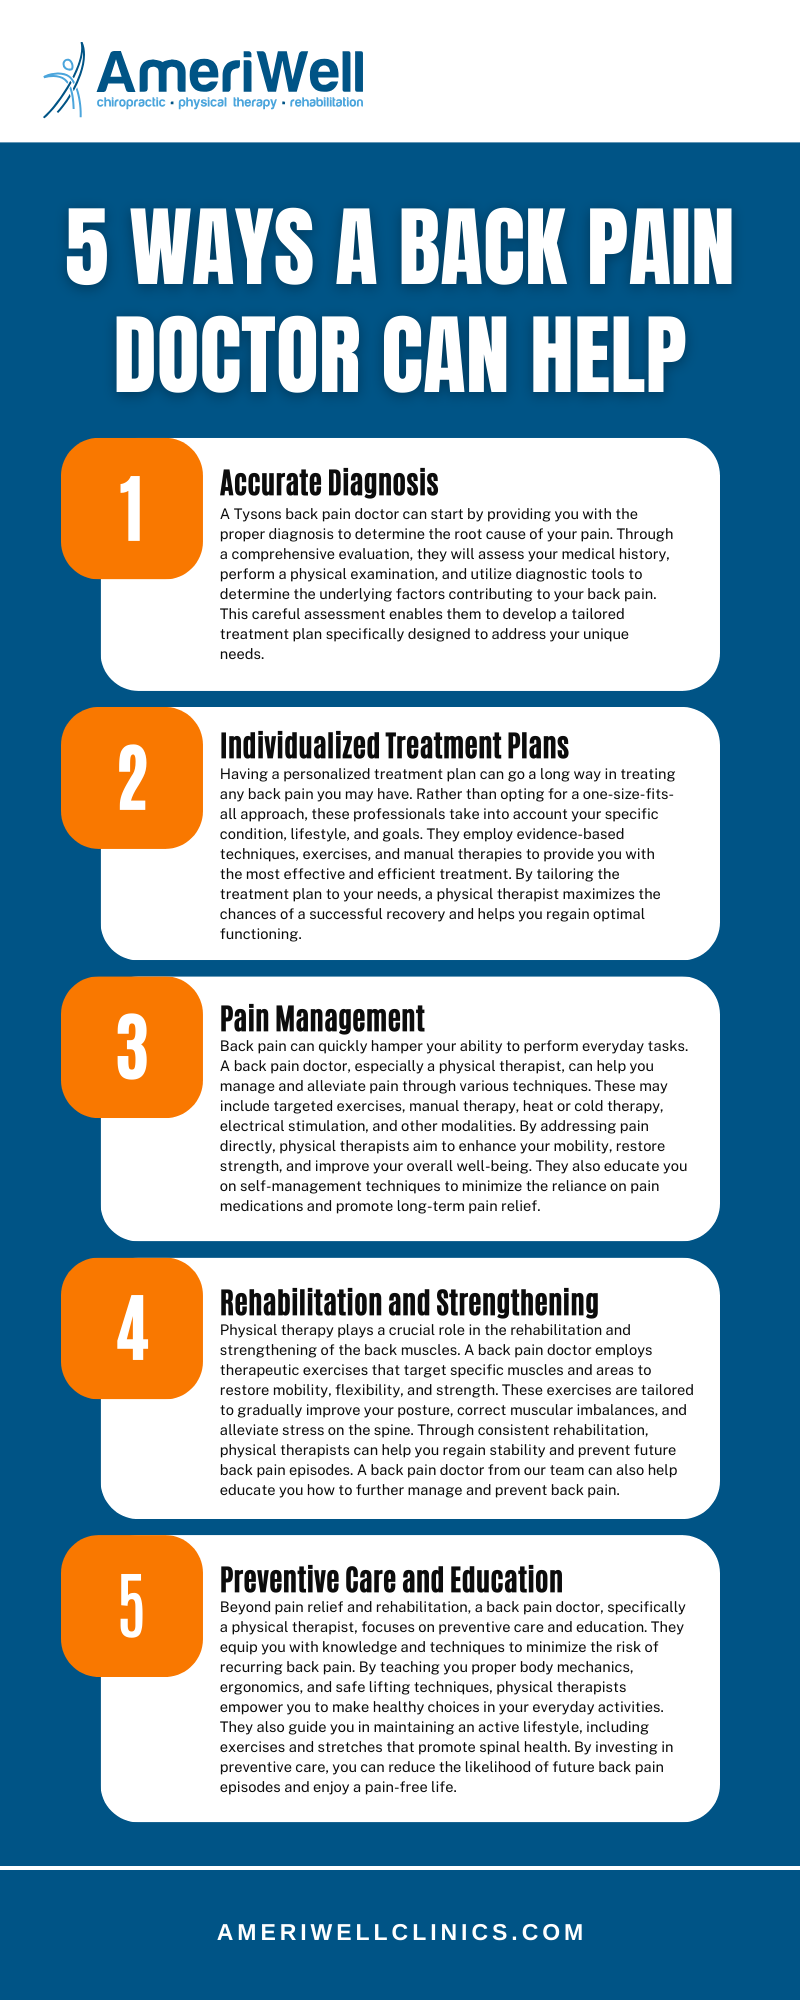 5 Ways A Back Pain Doctor Can Help Infographic